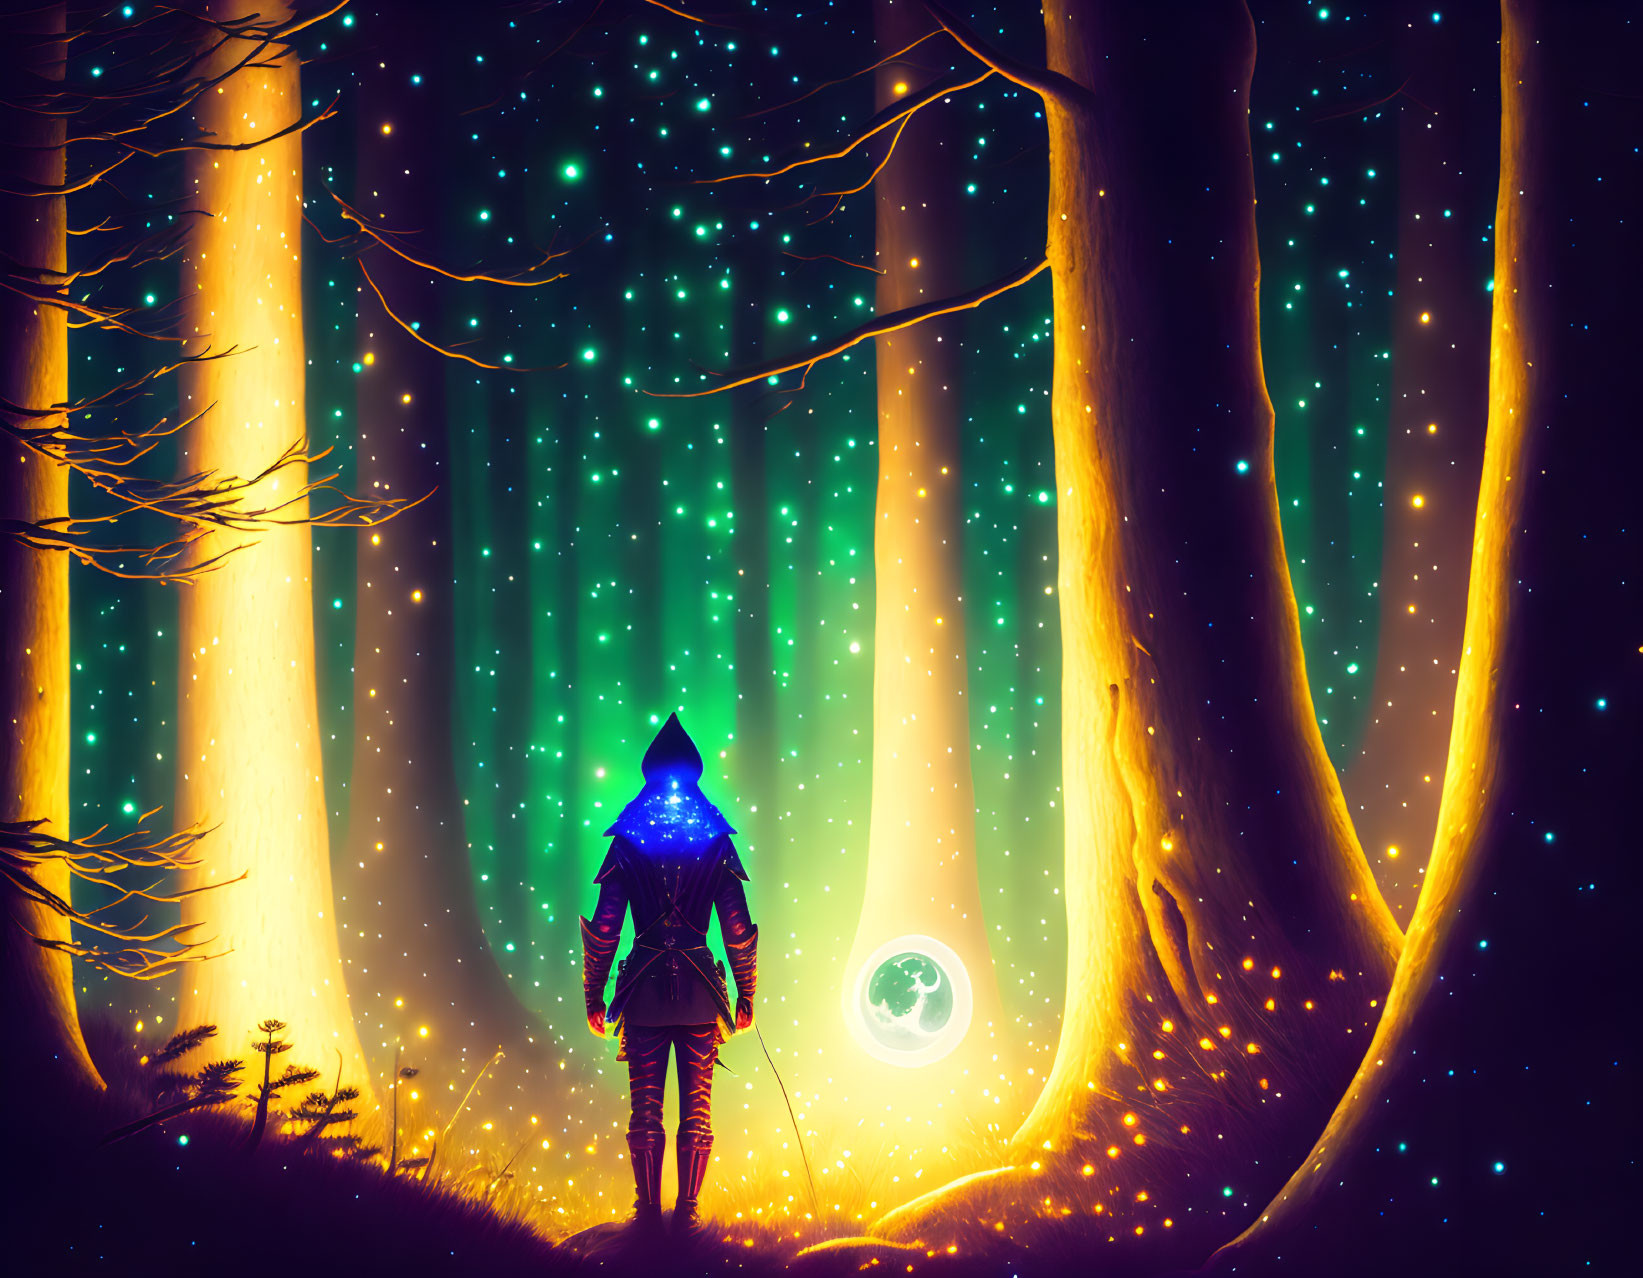 Cloaked figure in mystical forest with glowing trees and starry backdrop